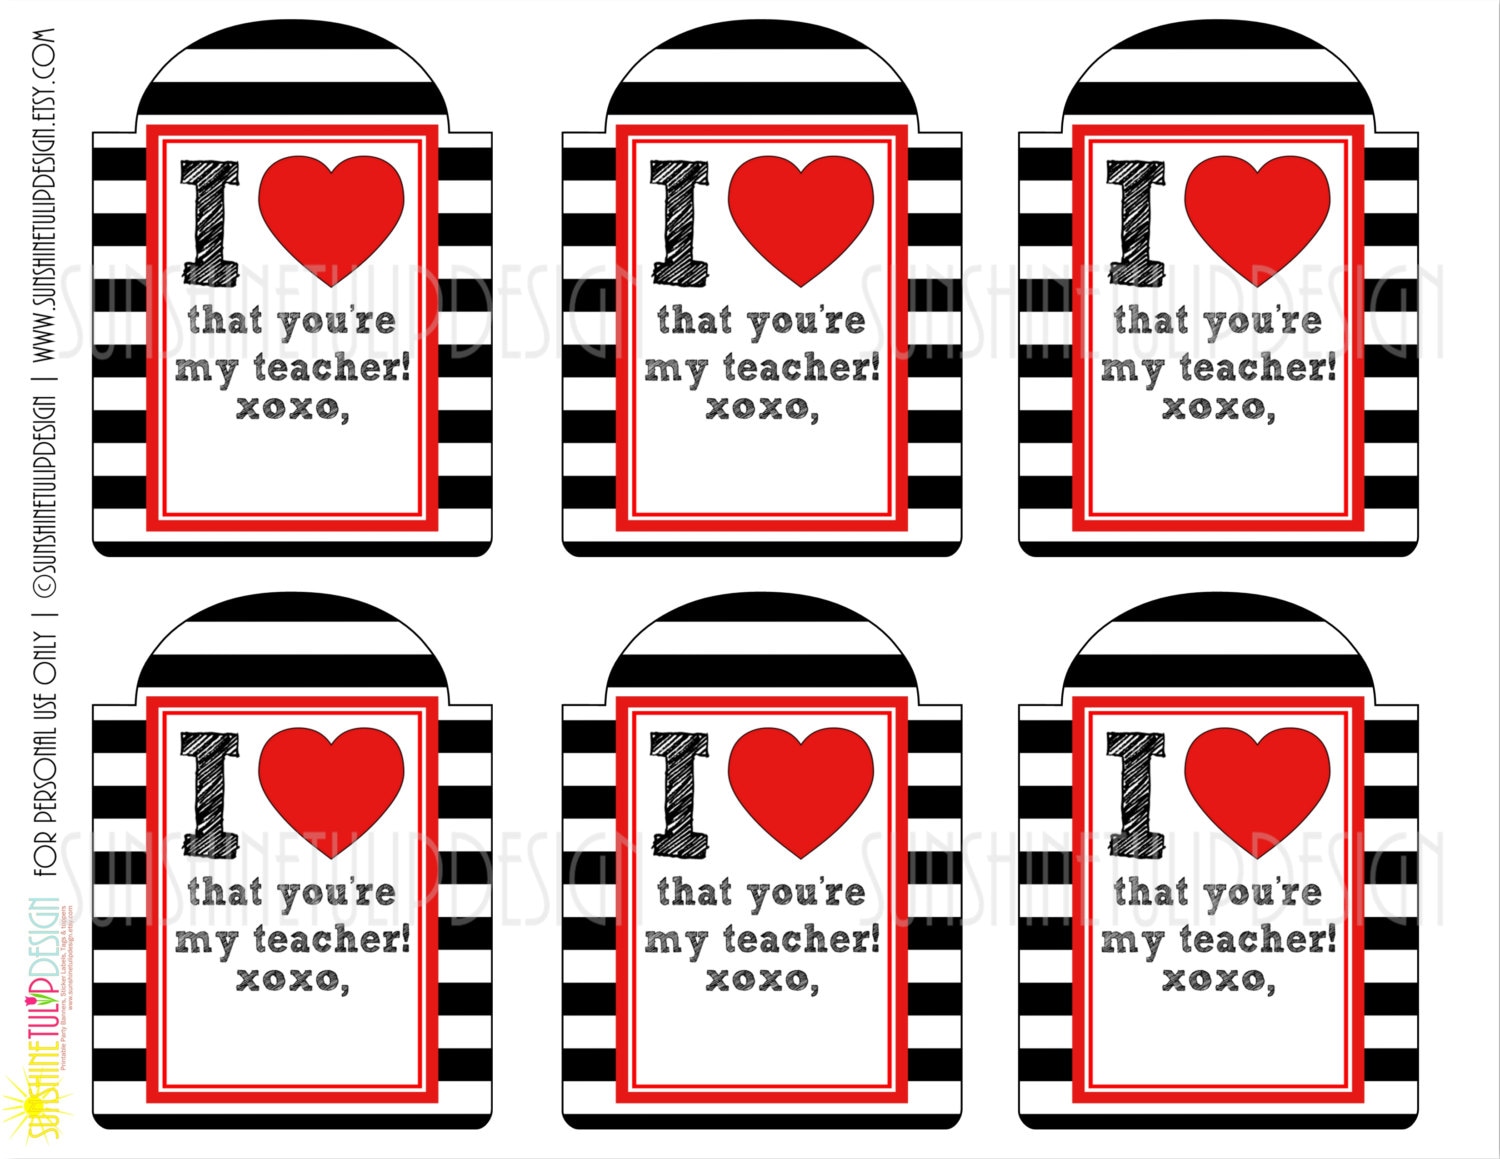 Tag teacher. Back to School Gifts. Print and Gift. Send Gifts to teachers.